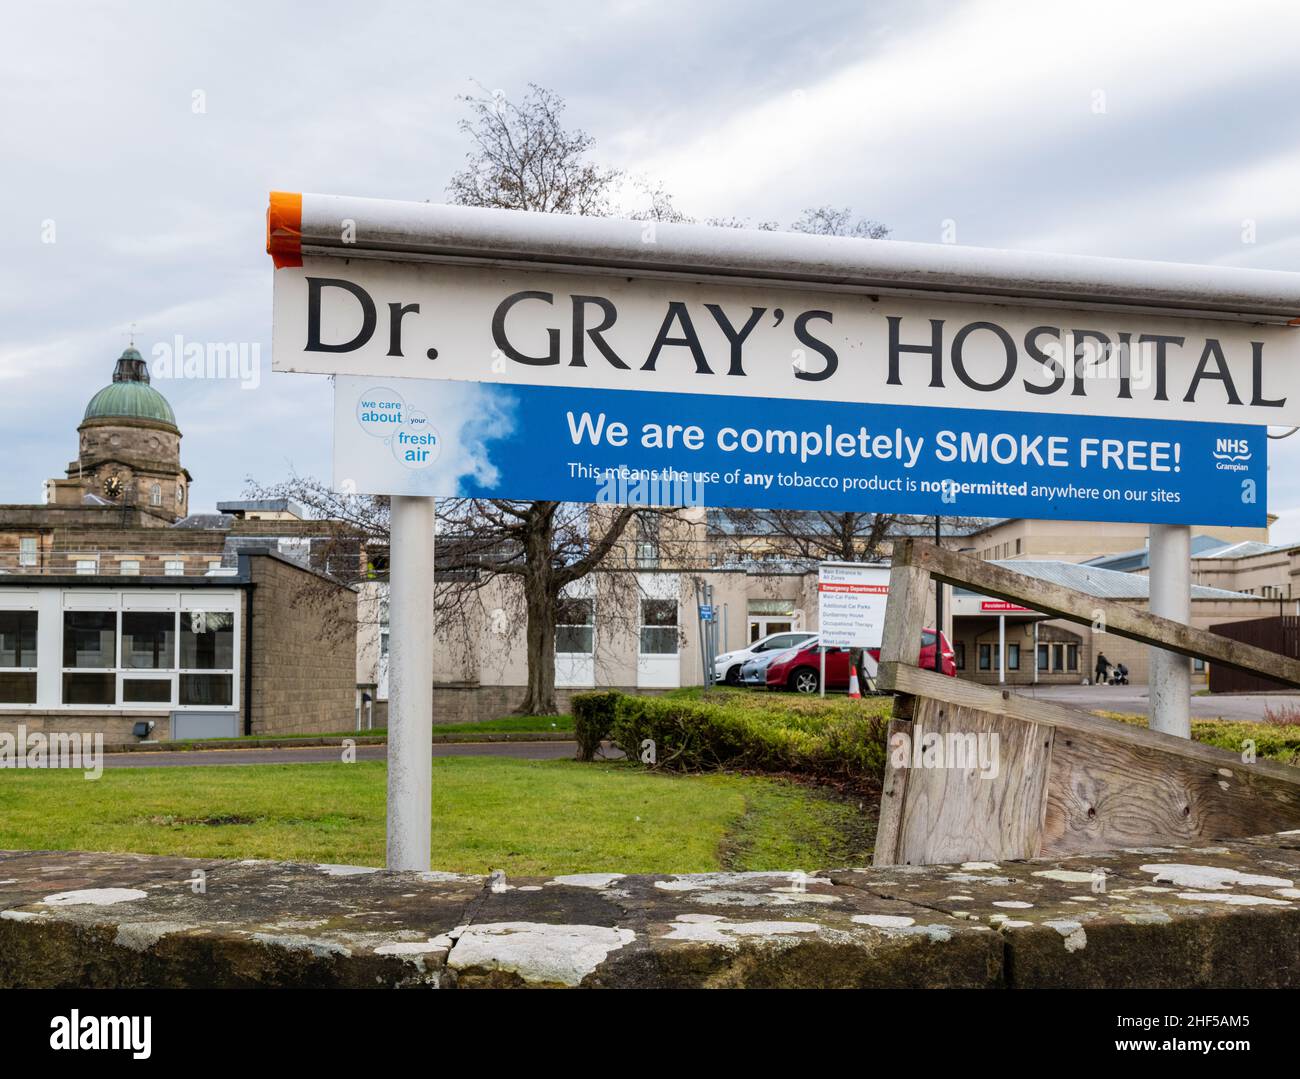 ELGIN, MORAY, SCOTLAND - 12 JANUARY 2022: This is a view of the exterior of Dr Grays Hospital in Elgin, Moray, Scotland on 12 January 2022. Stock Photo